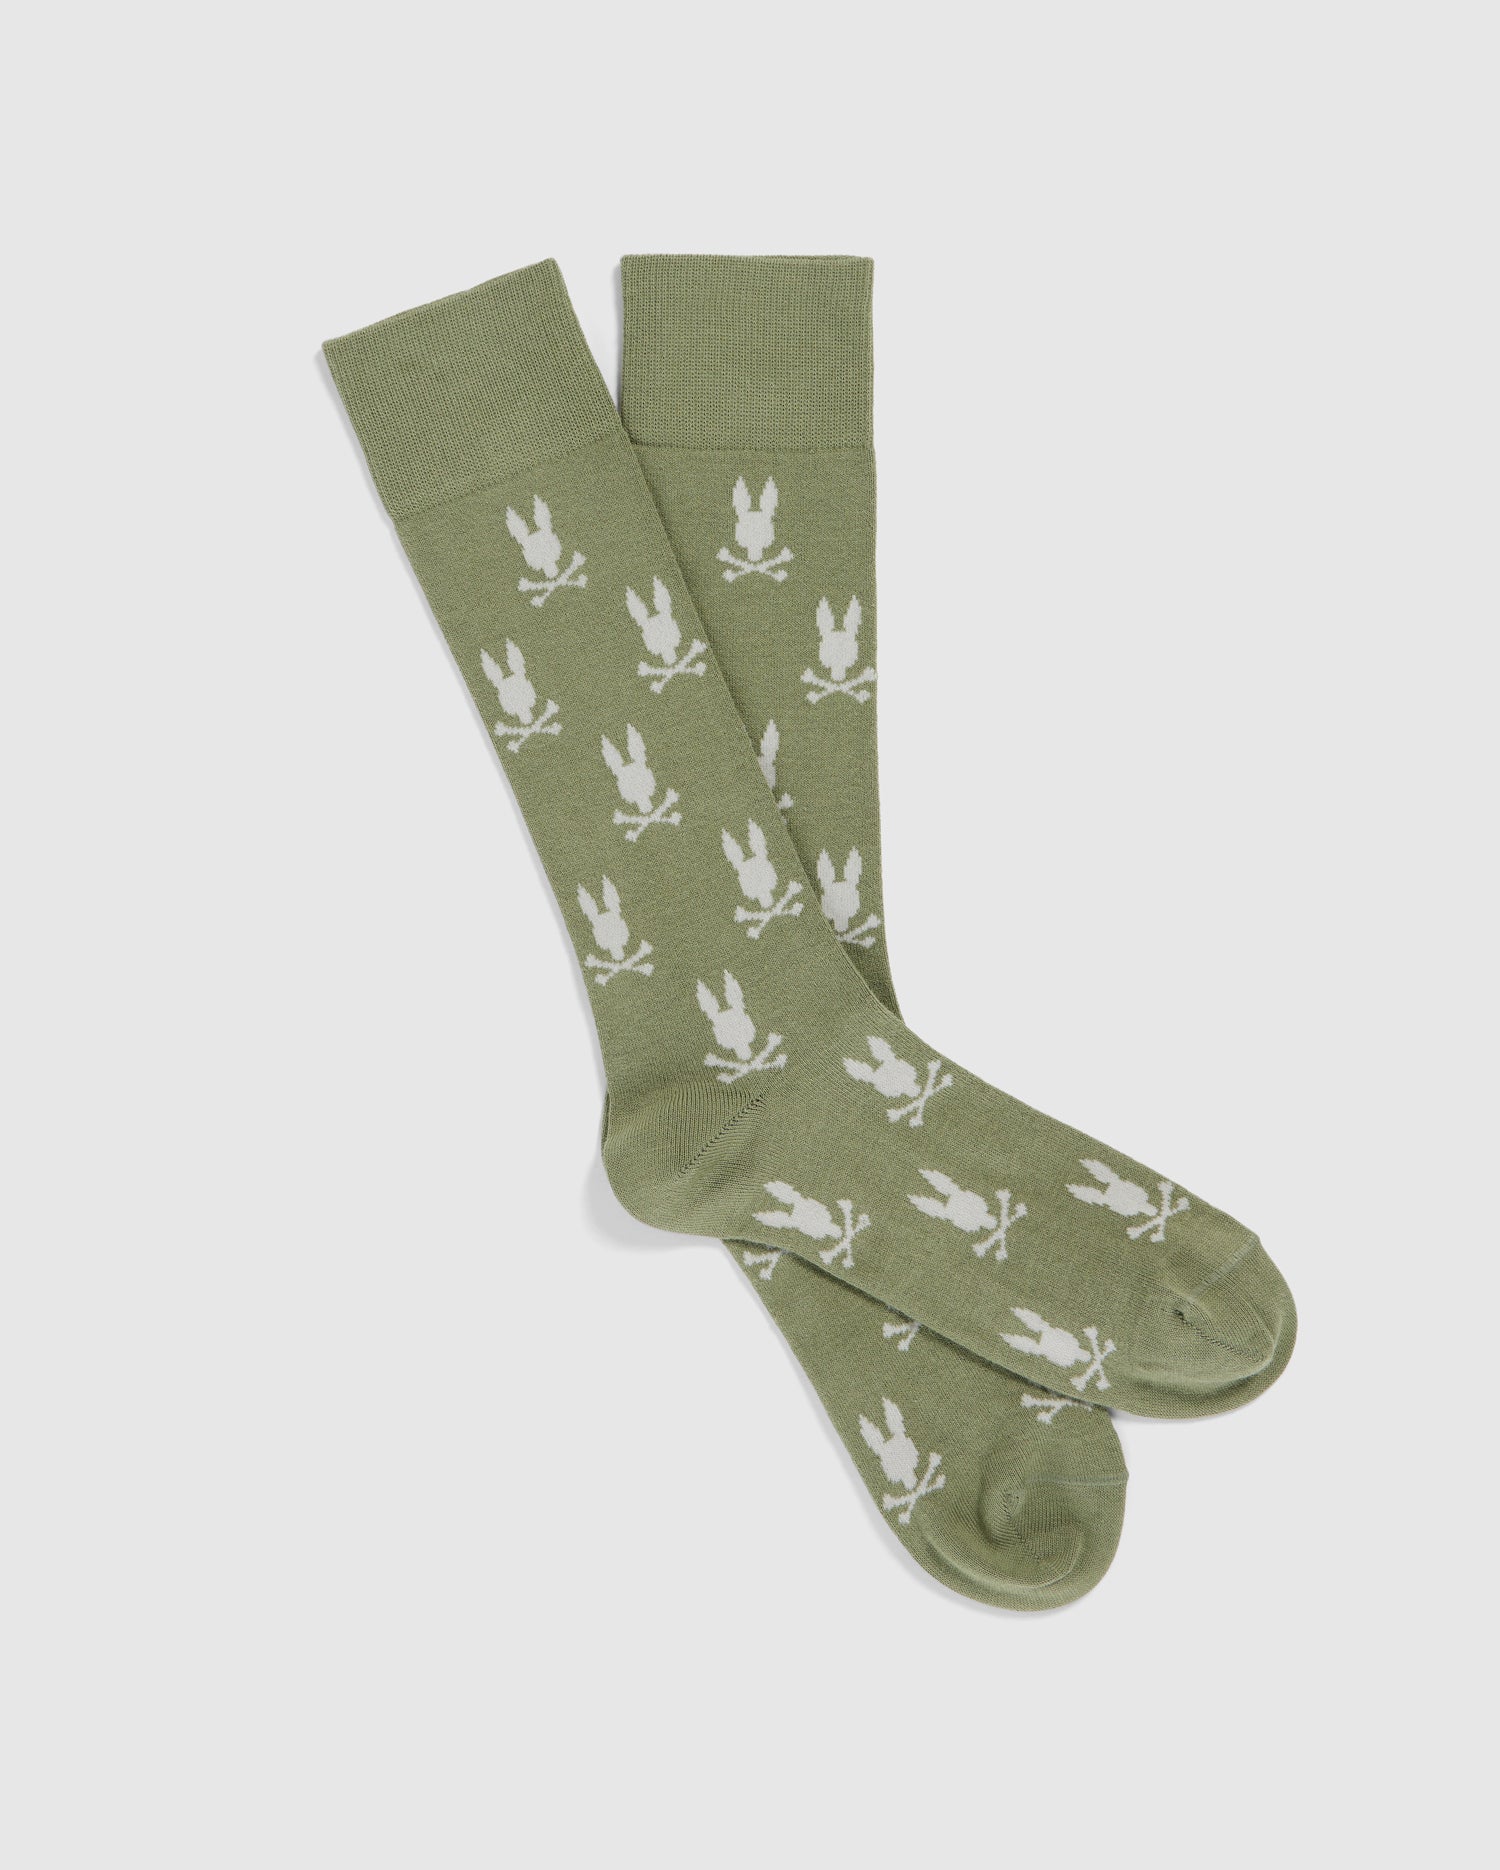 A pair of MENS DRESS SOCK - B6F750C200 by Psycho Bunny featuring a repeating white bunny pattern and crossed swords. Made from luxurious Peruvian Pima cotton, the socks are laid flat on a white background.